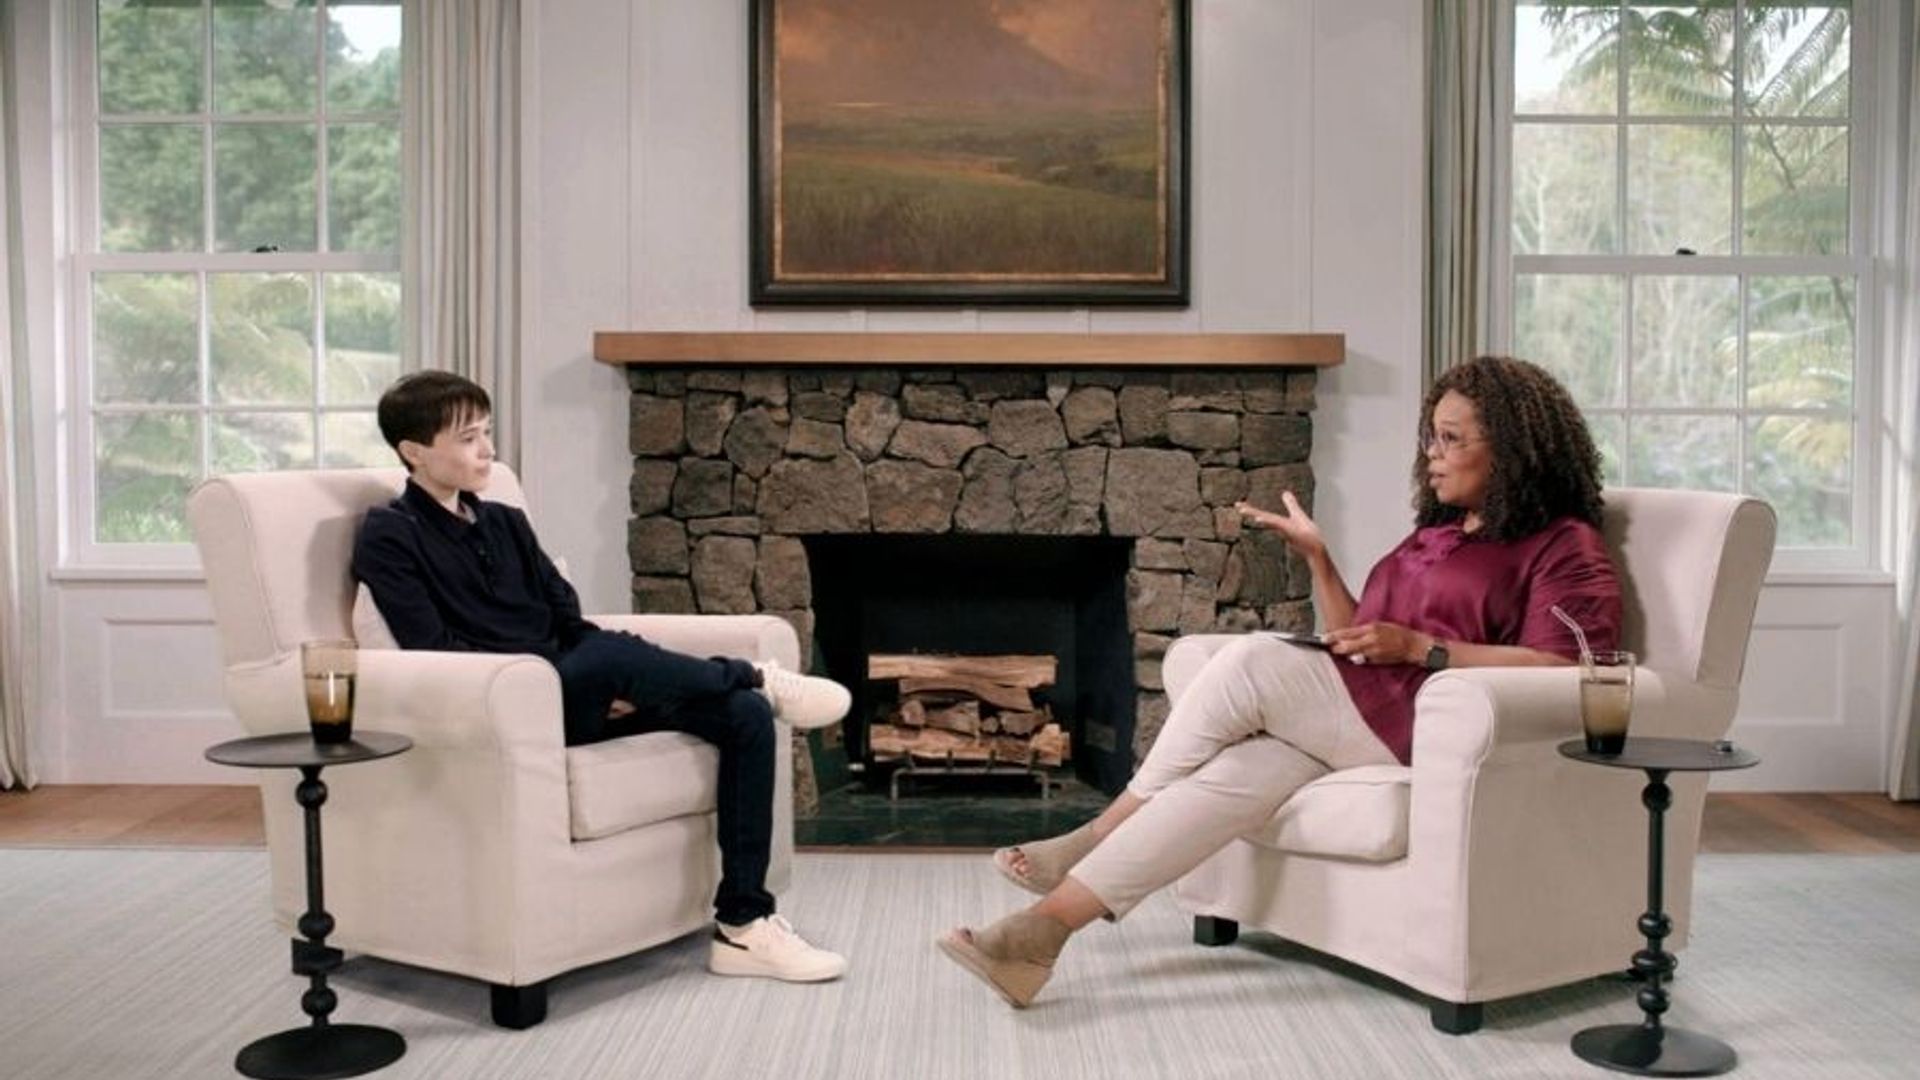 Elliot Page opens up to Oprah Winfrey in emotional first TV interview since coming out as transgender